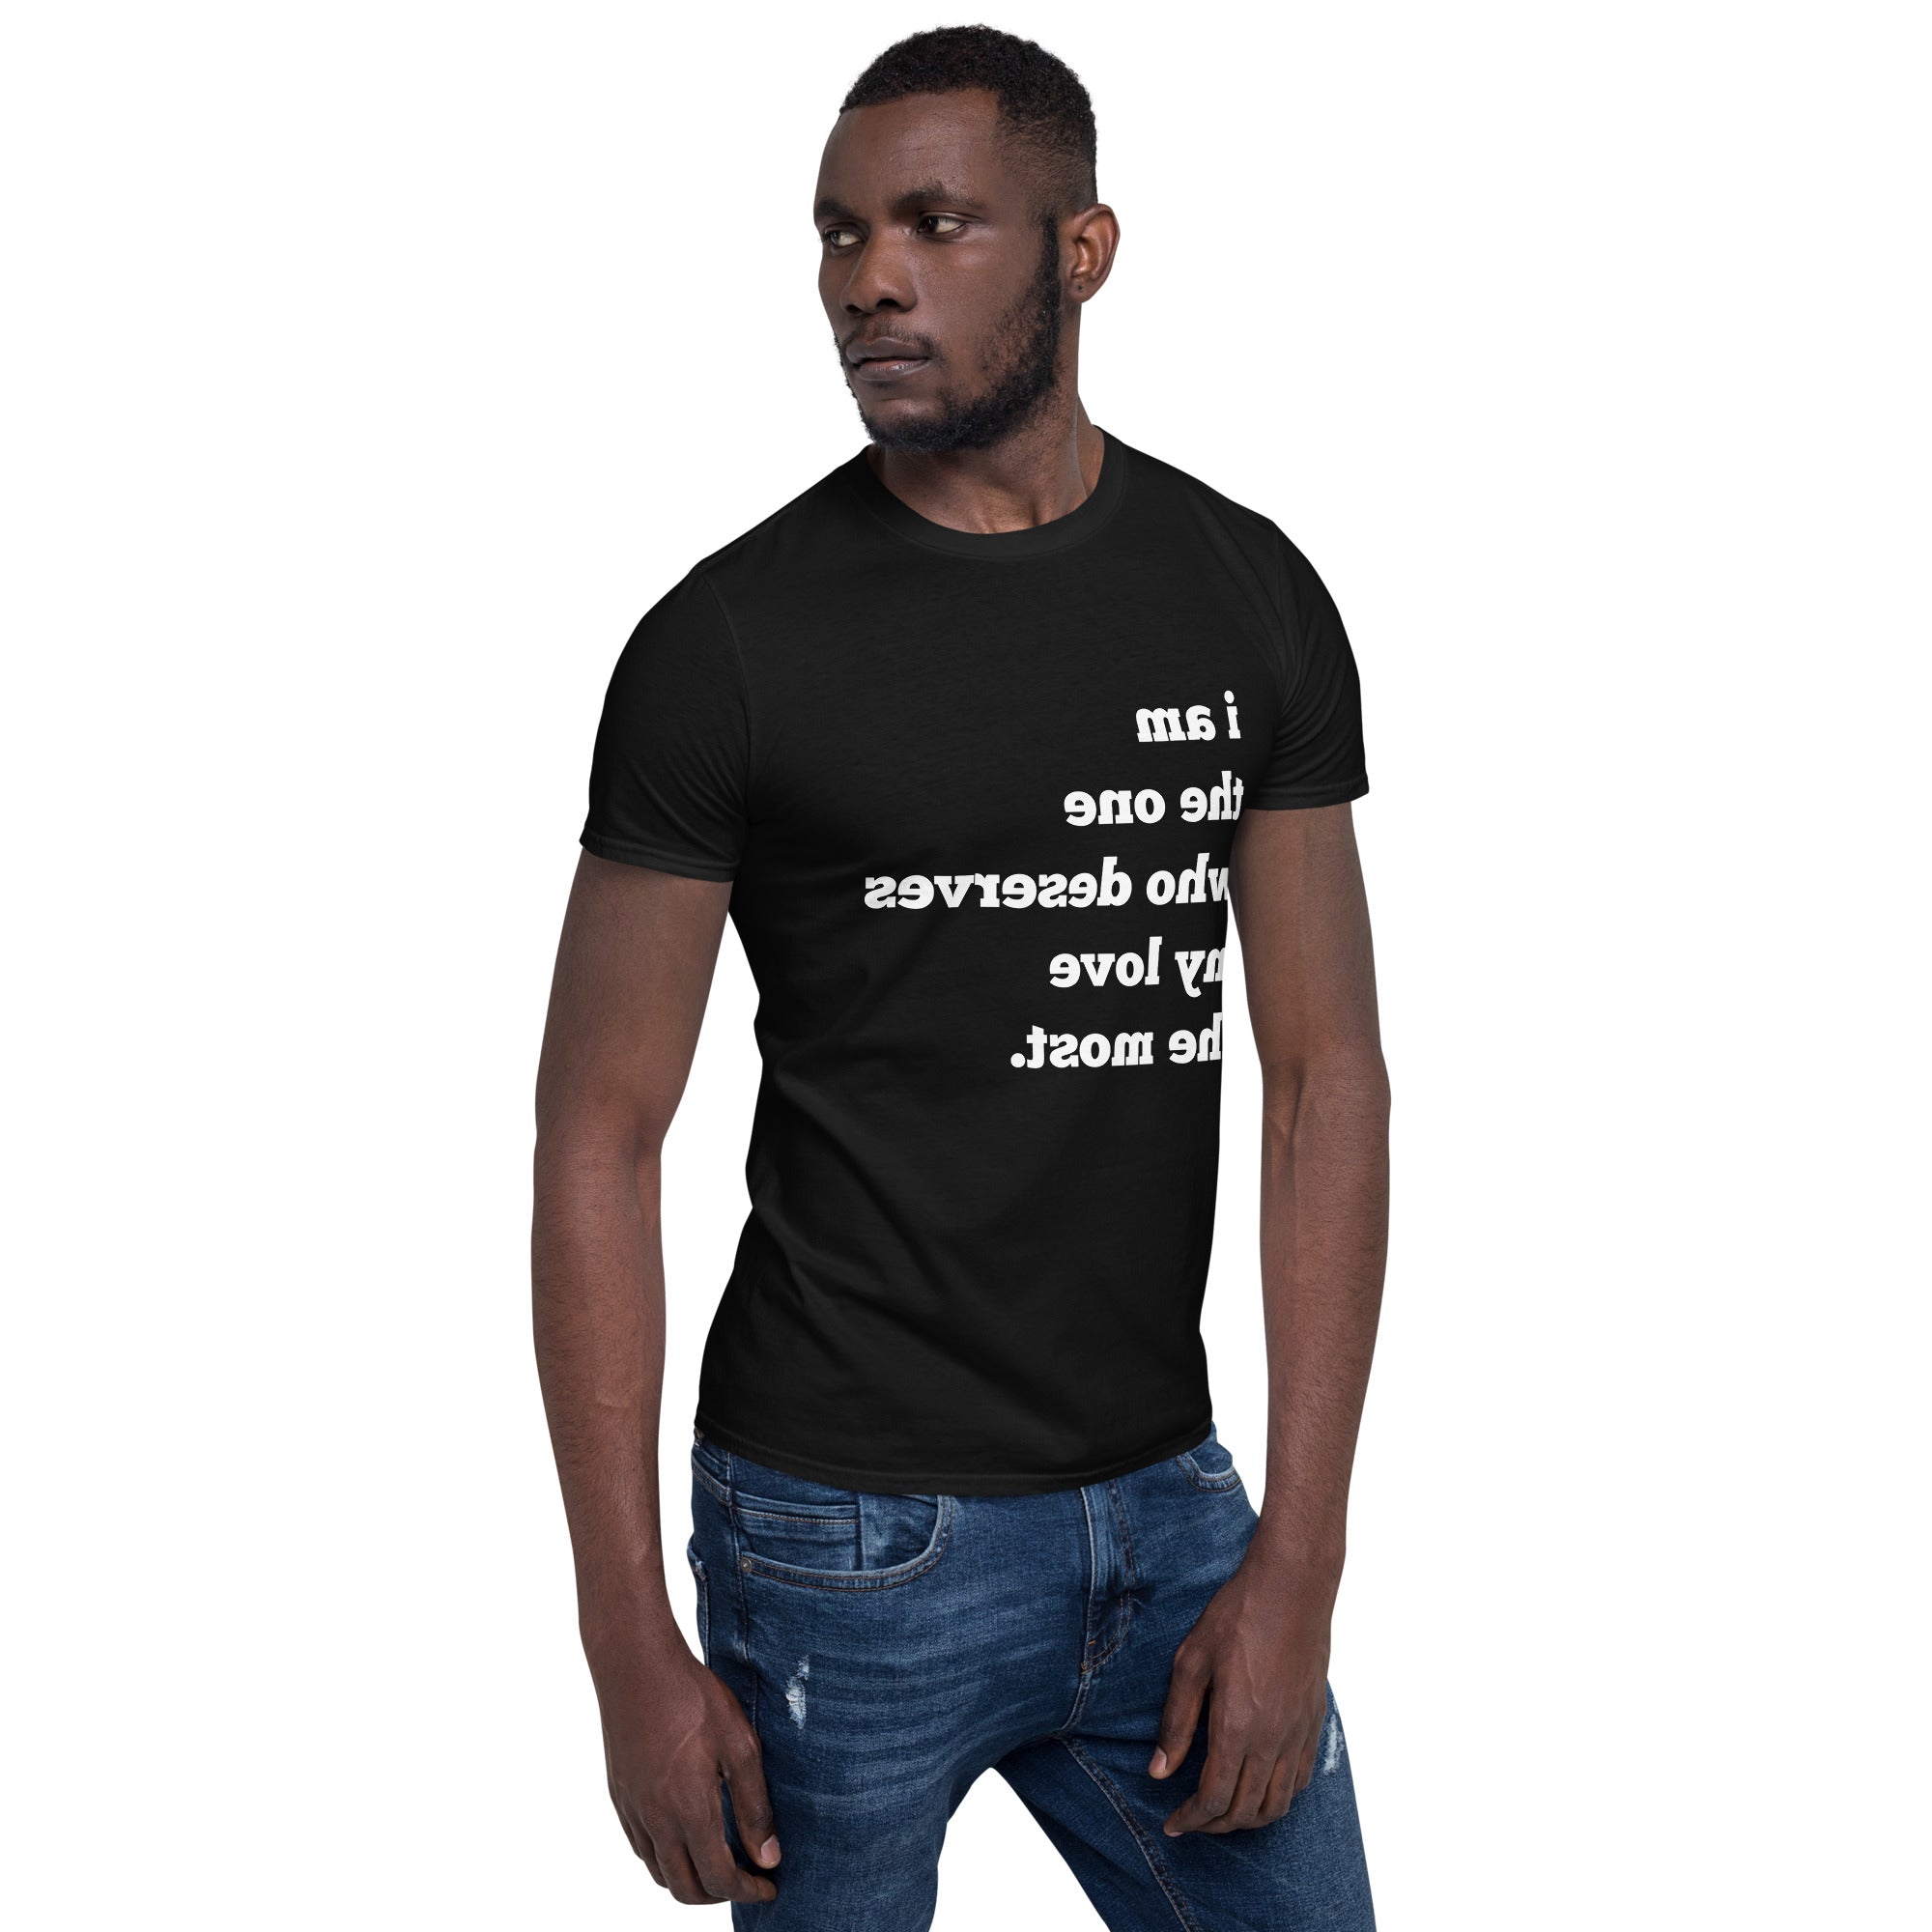 I AM THE ONE WHO DESERVES MY LOVE THE MOST Mirror Affirmation Tee (Black, Short-Sleeve)